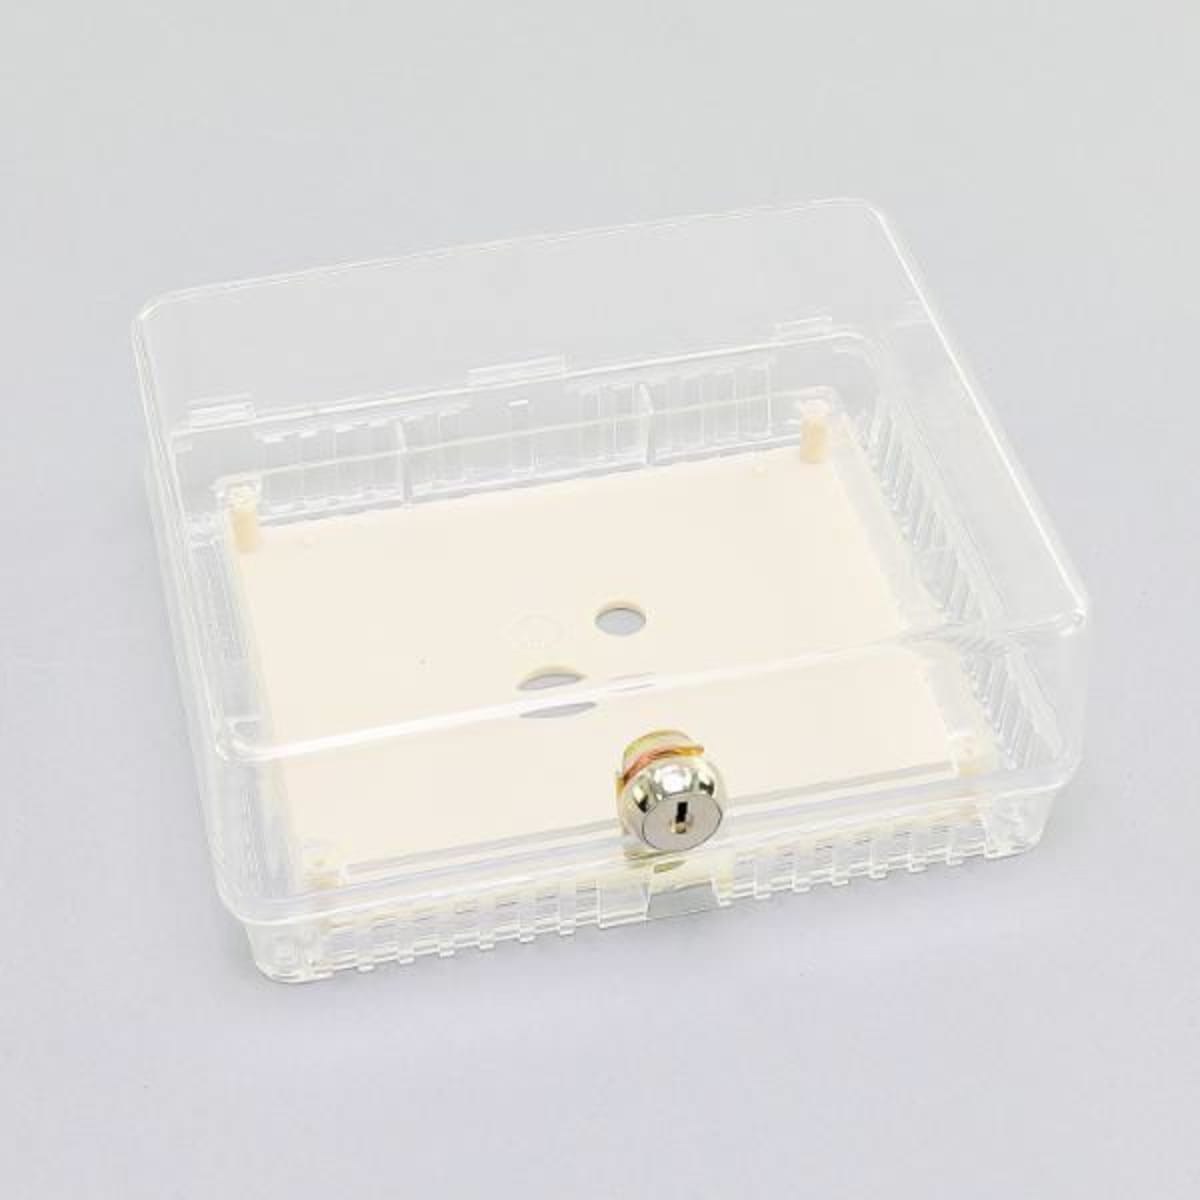 Generic Thermostat Cover Securetemp Universal Thermostat Guard Easy Install  Clear